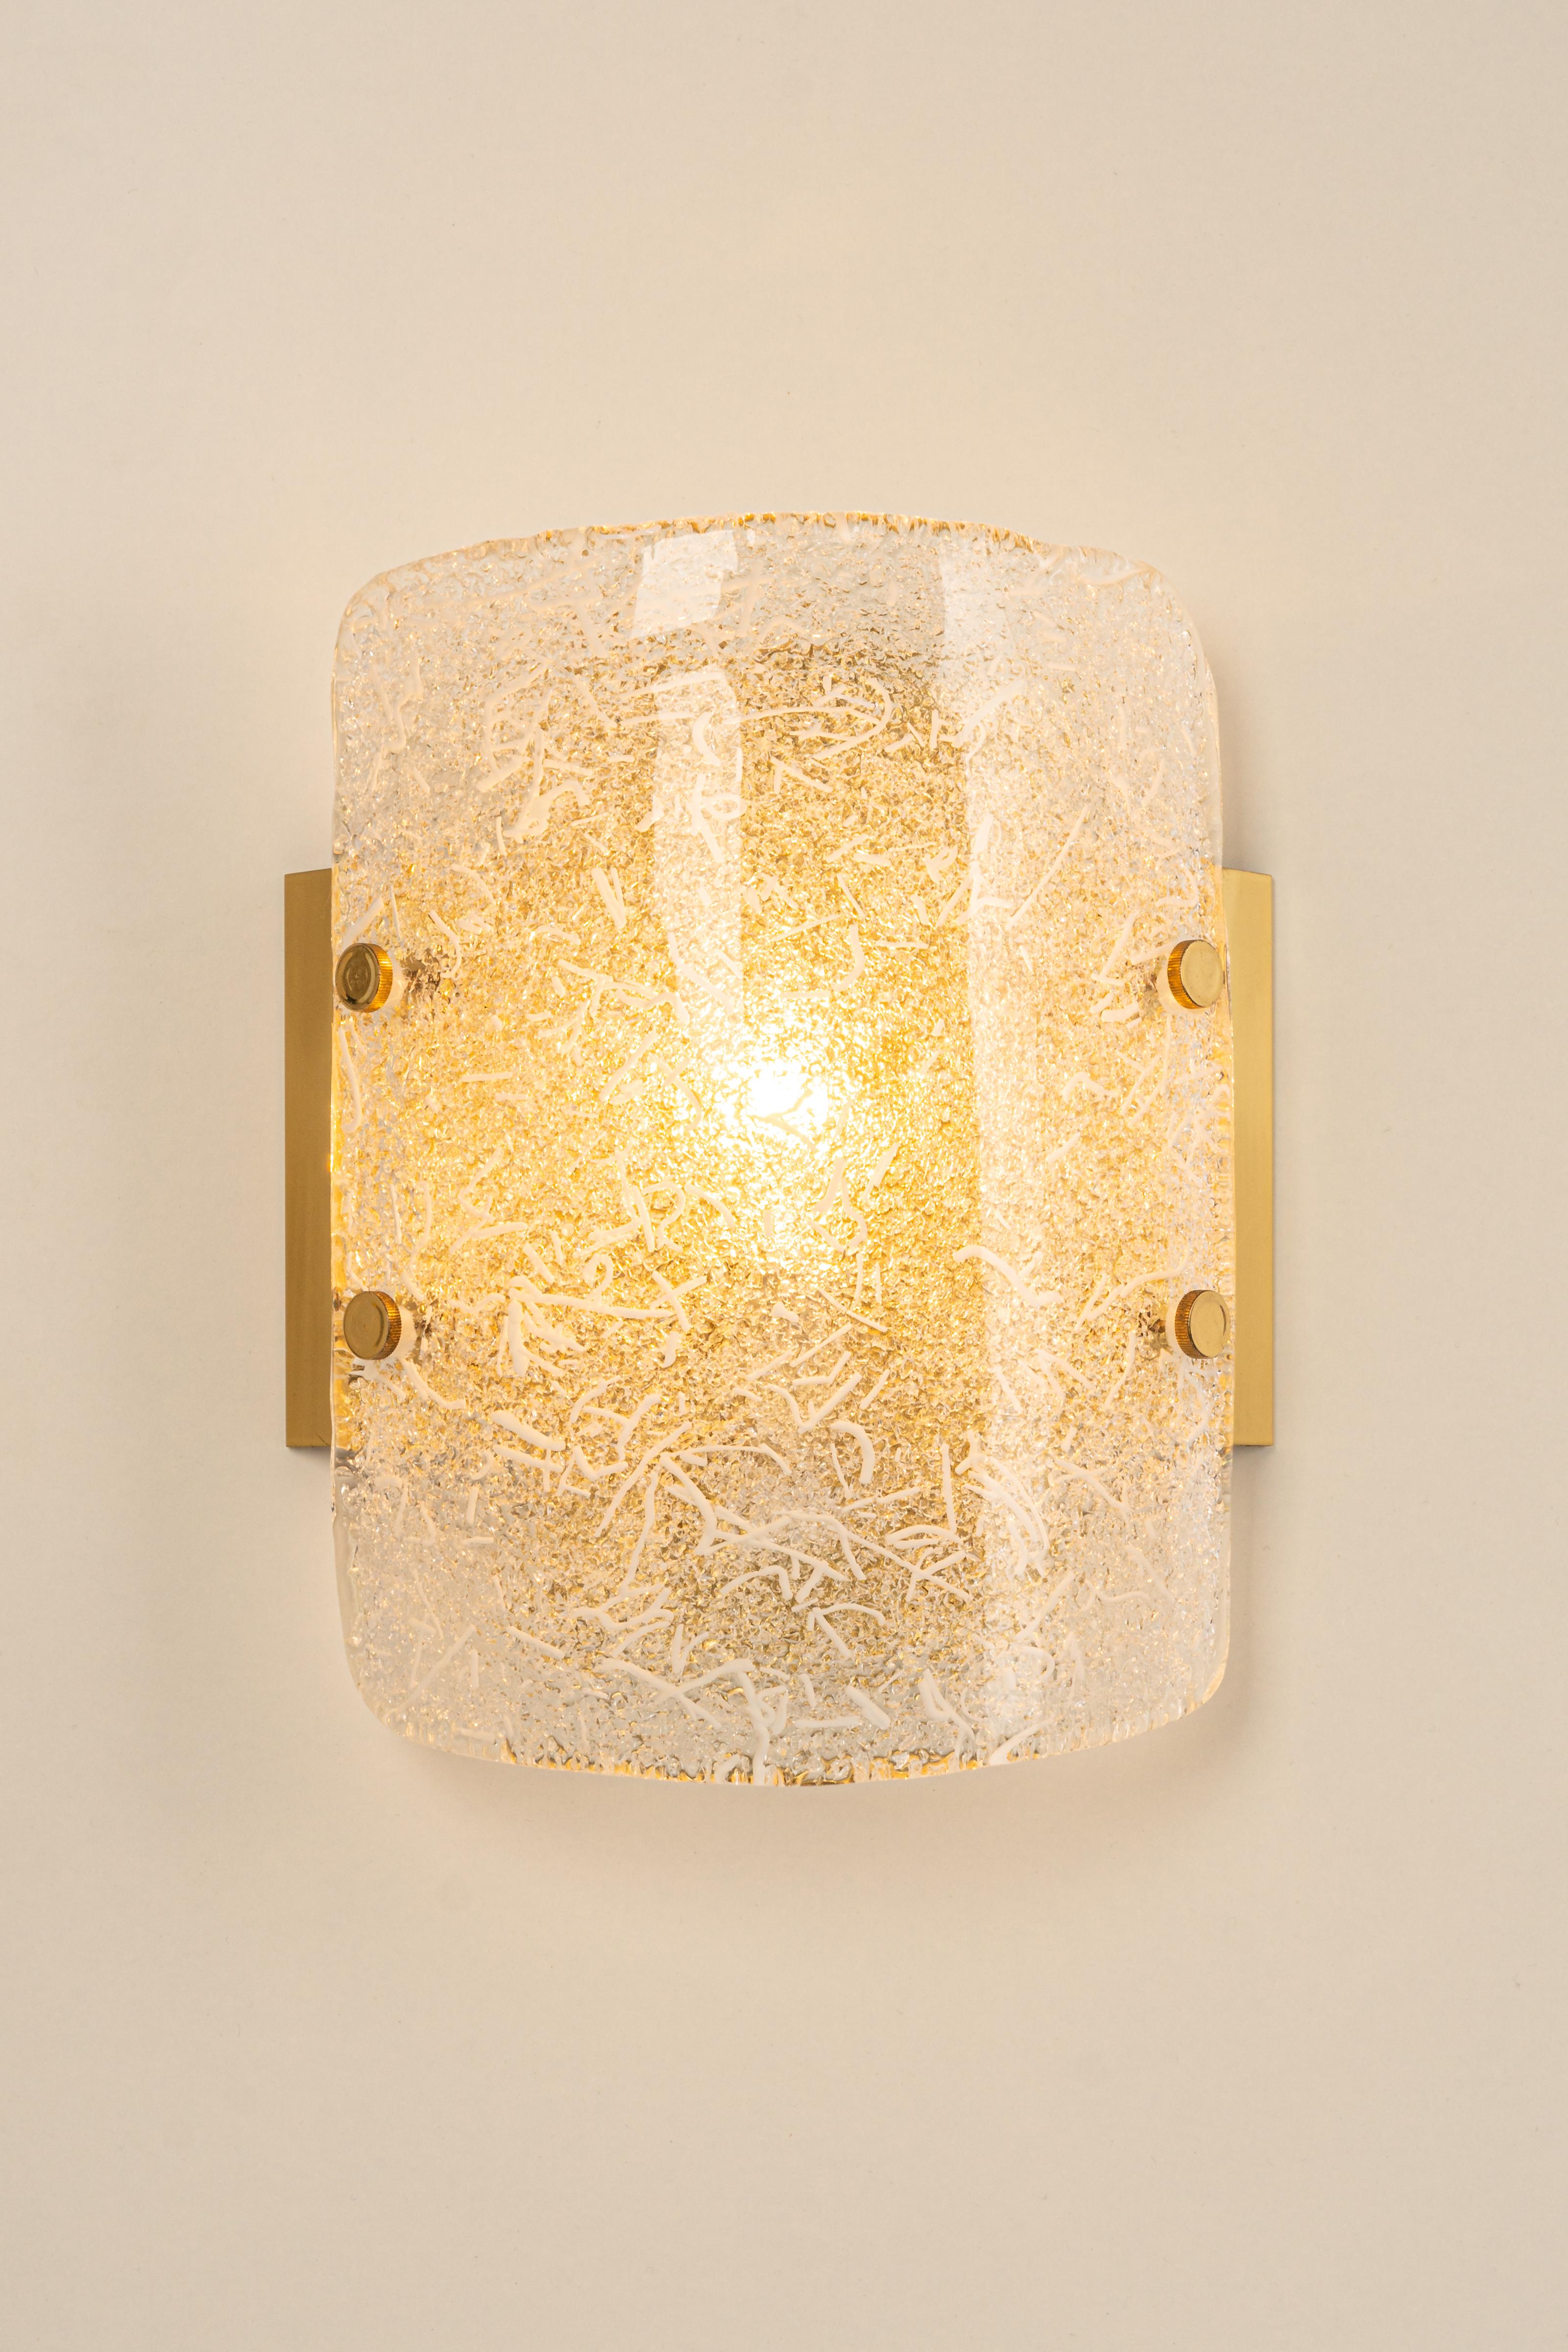 Late 20th Century Pair of Murano Glass Wall Sconces by Hillebrand, Germany, 1970s For Sale